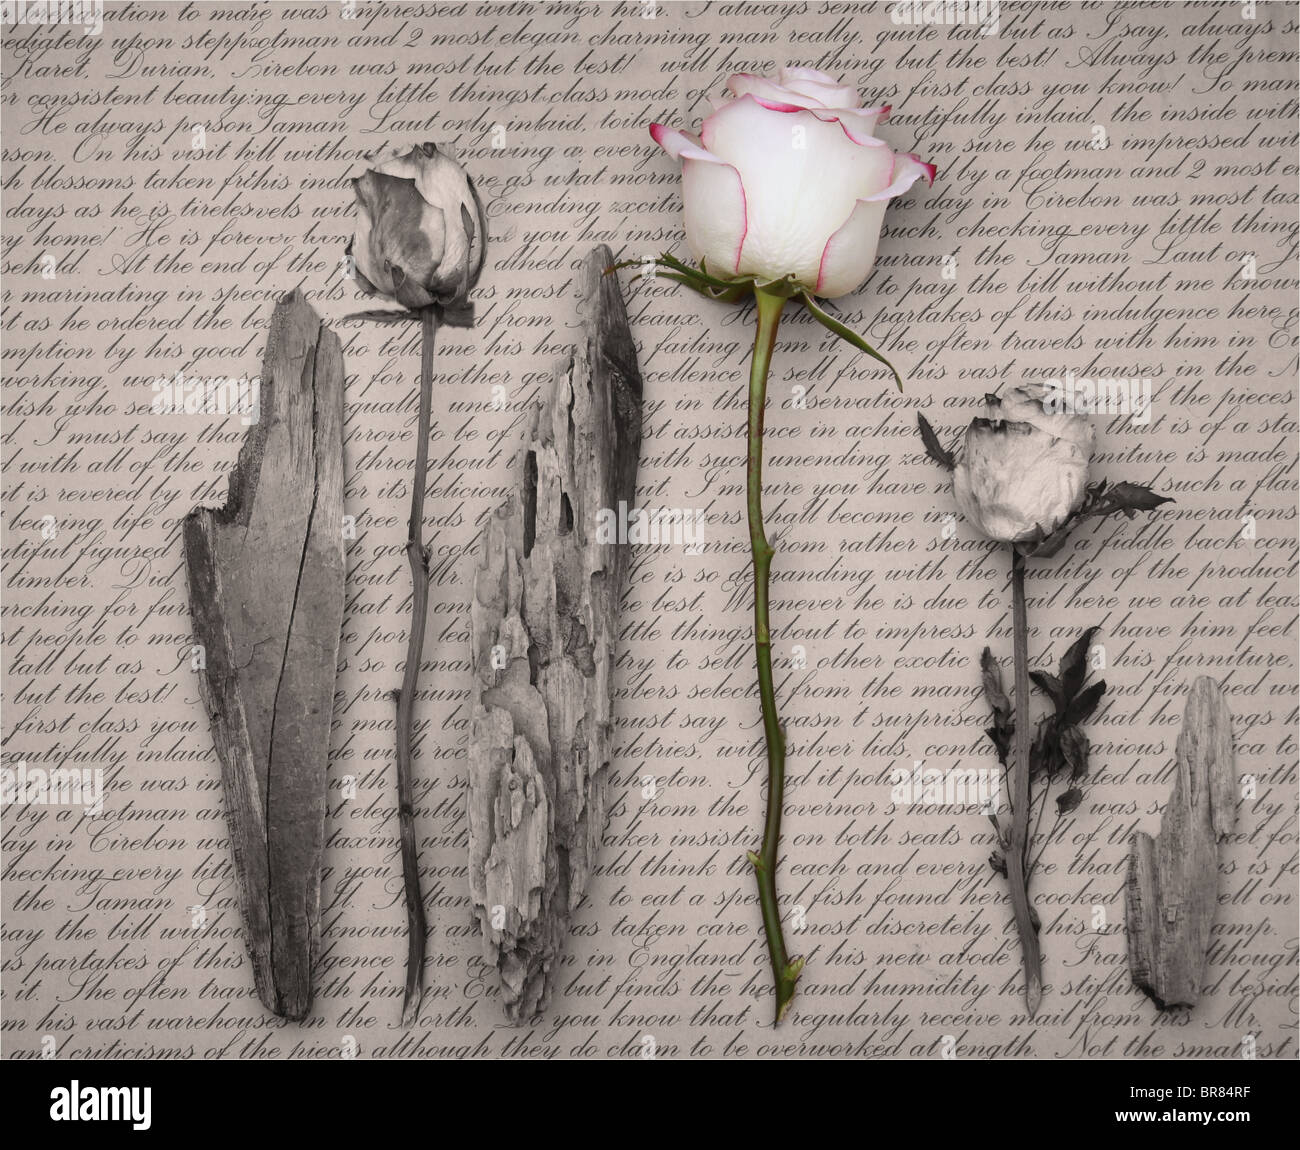 Still life with dried roses and driftwood on a background of script. Stock Photo